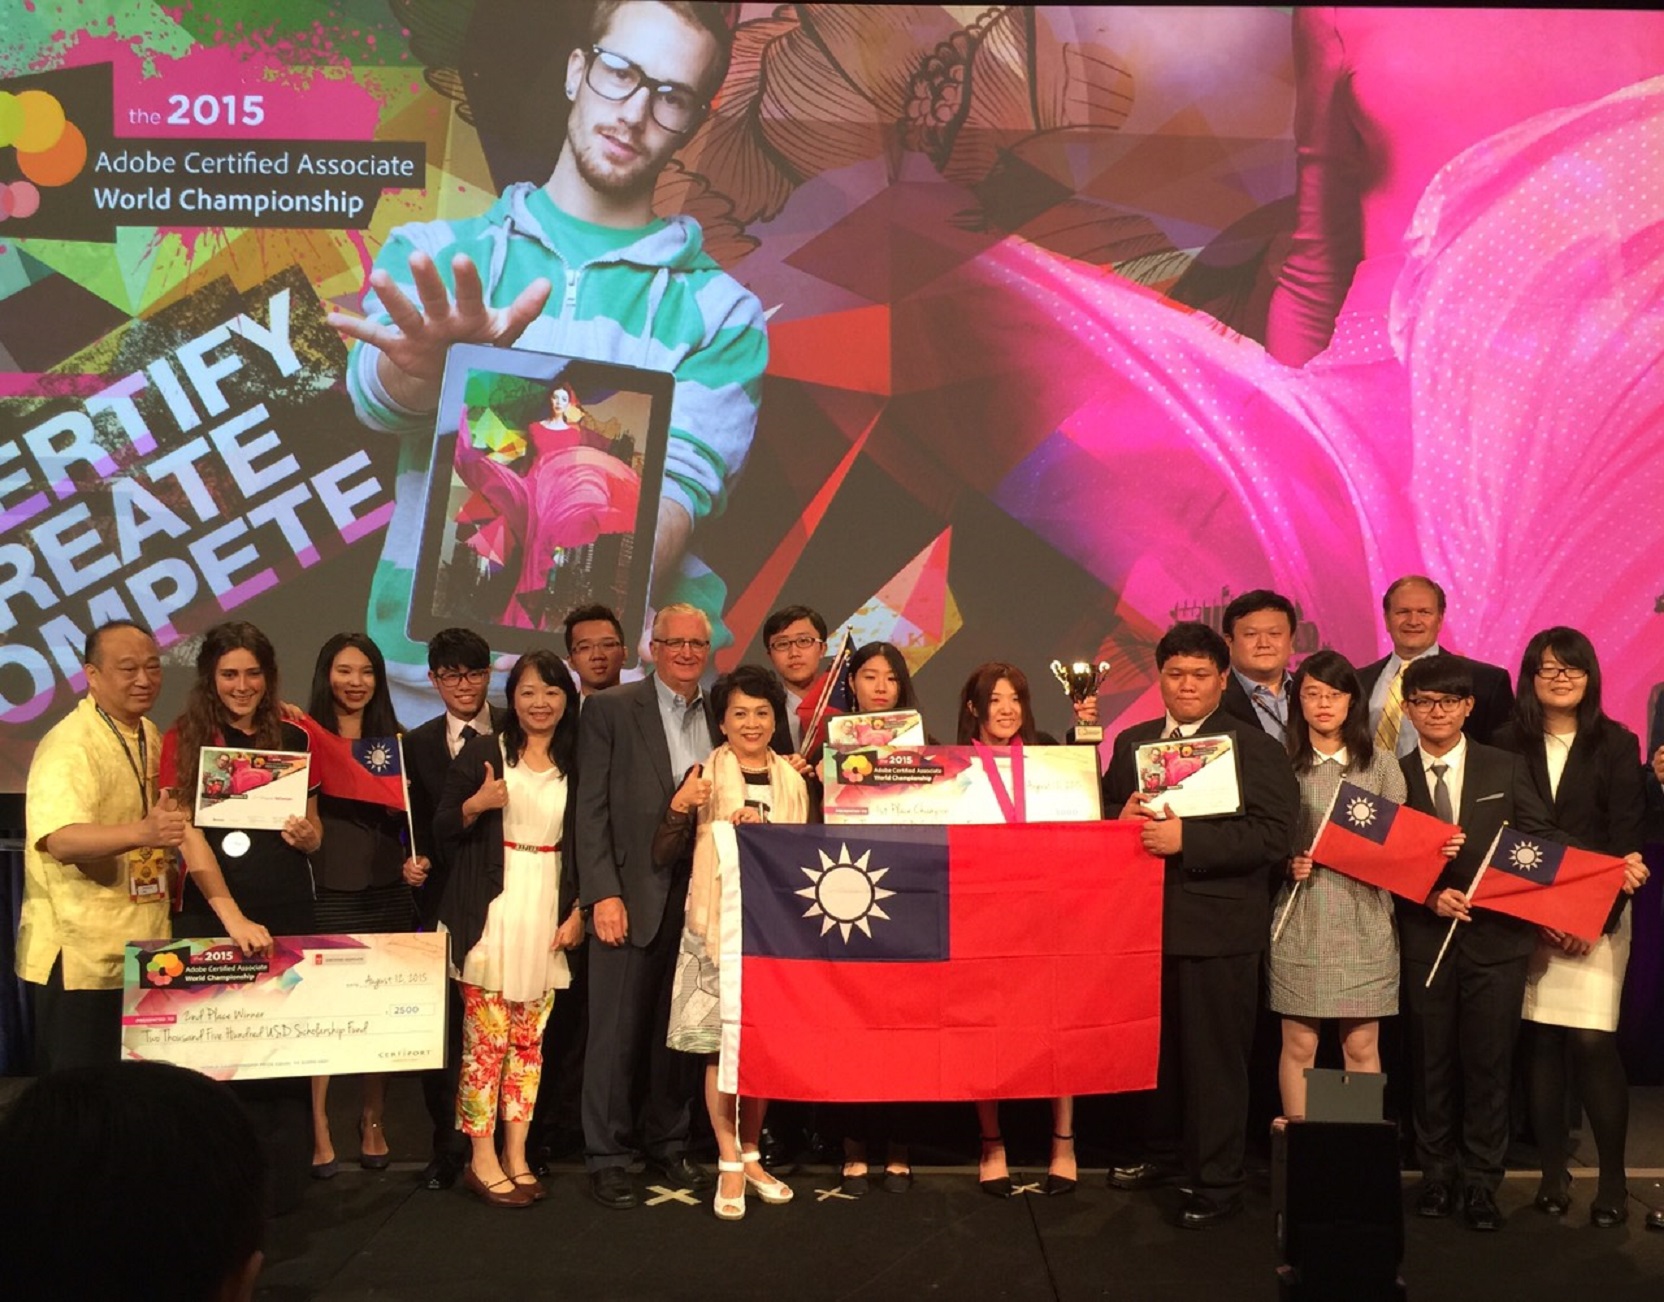 Taiwanese students win medals at 2015 Adobe Certified Associate (ACA) World Championship